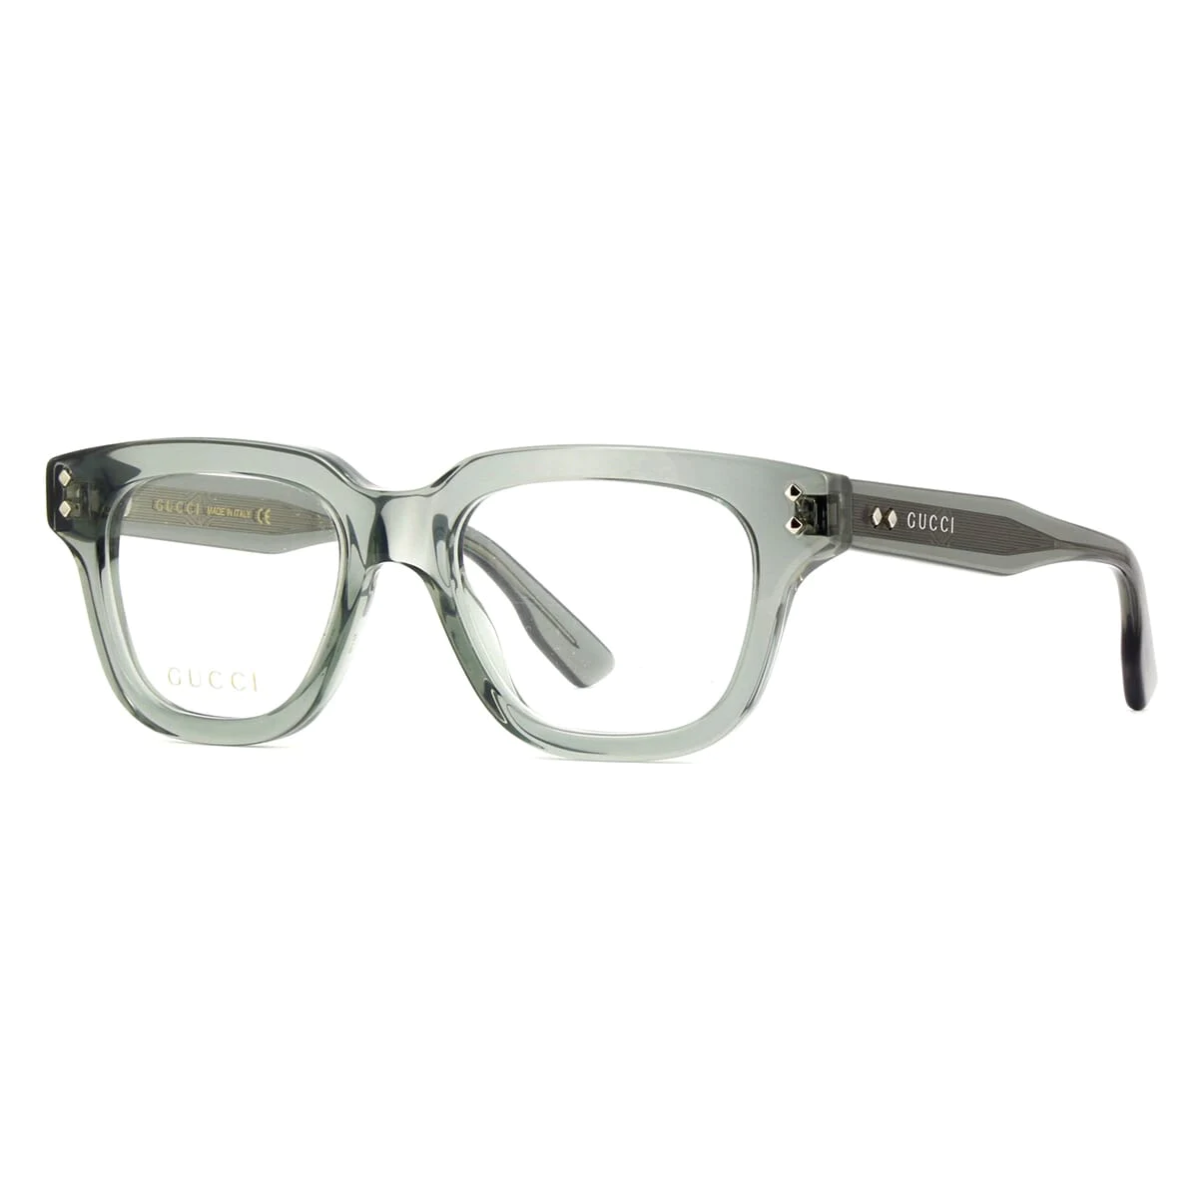 "Optorium's Gucci Selection - Explore the luxury of Gucci 1219O frame for both genders."